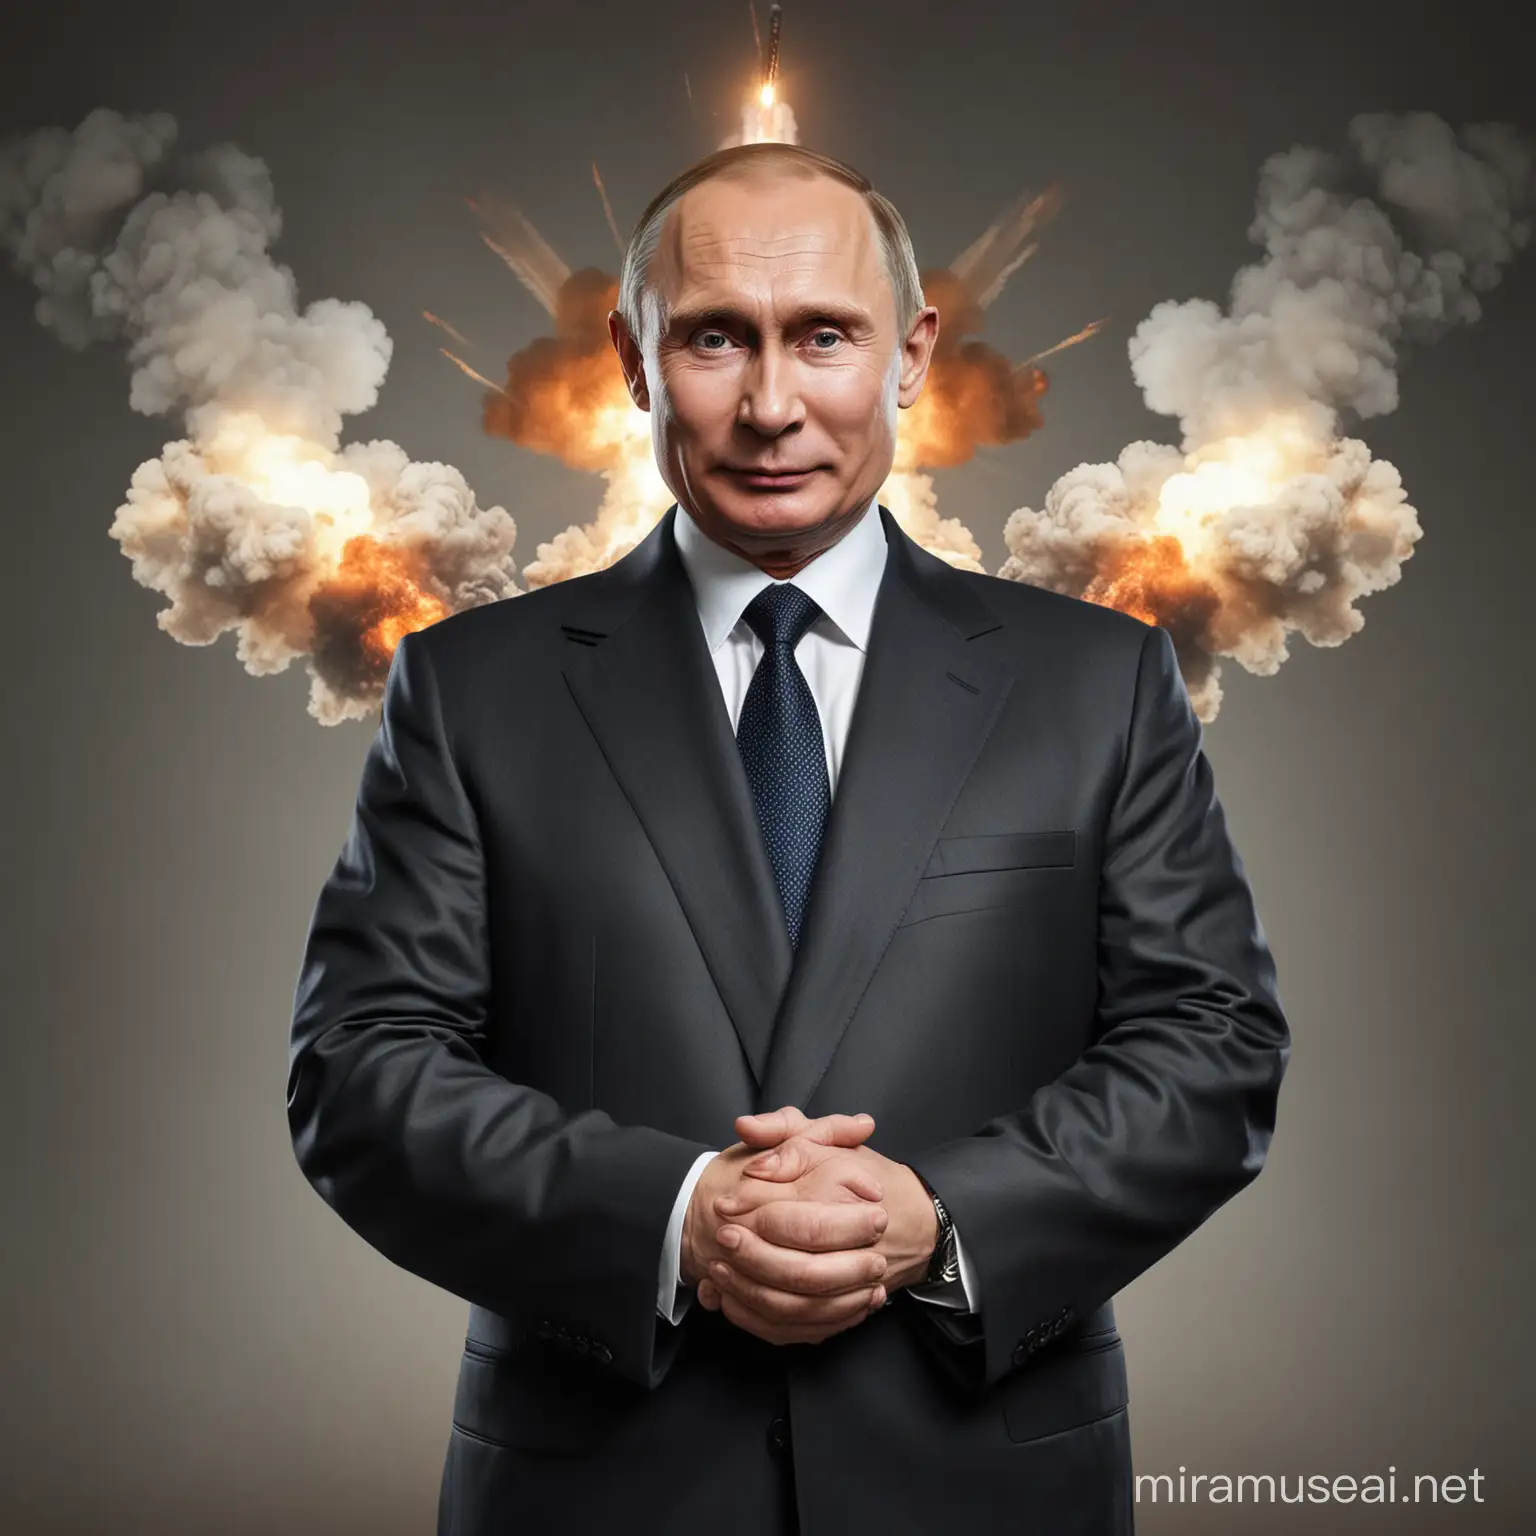 Russia as the world's most powerful country. with nuclear weapons, cheerful Putin, patrioritic 